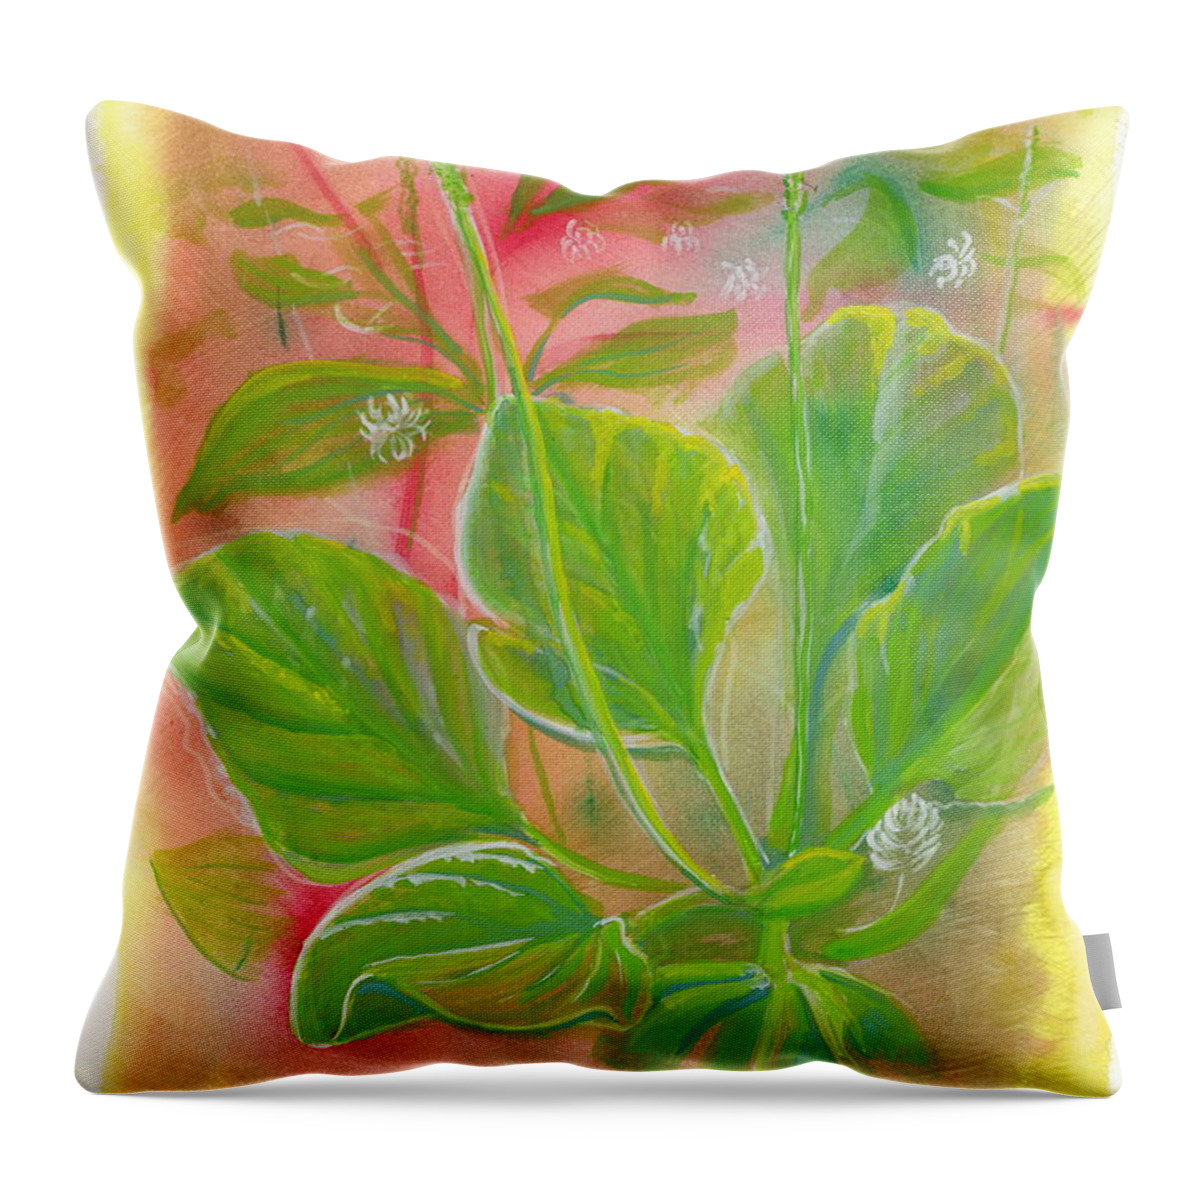 Watercolor Throw Pillow featuring the painting Forage. Broadleaf Plantain by Tammy Nara